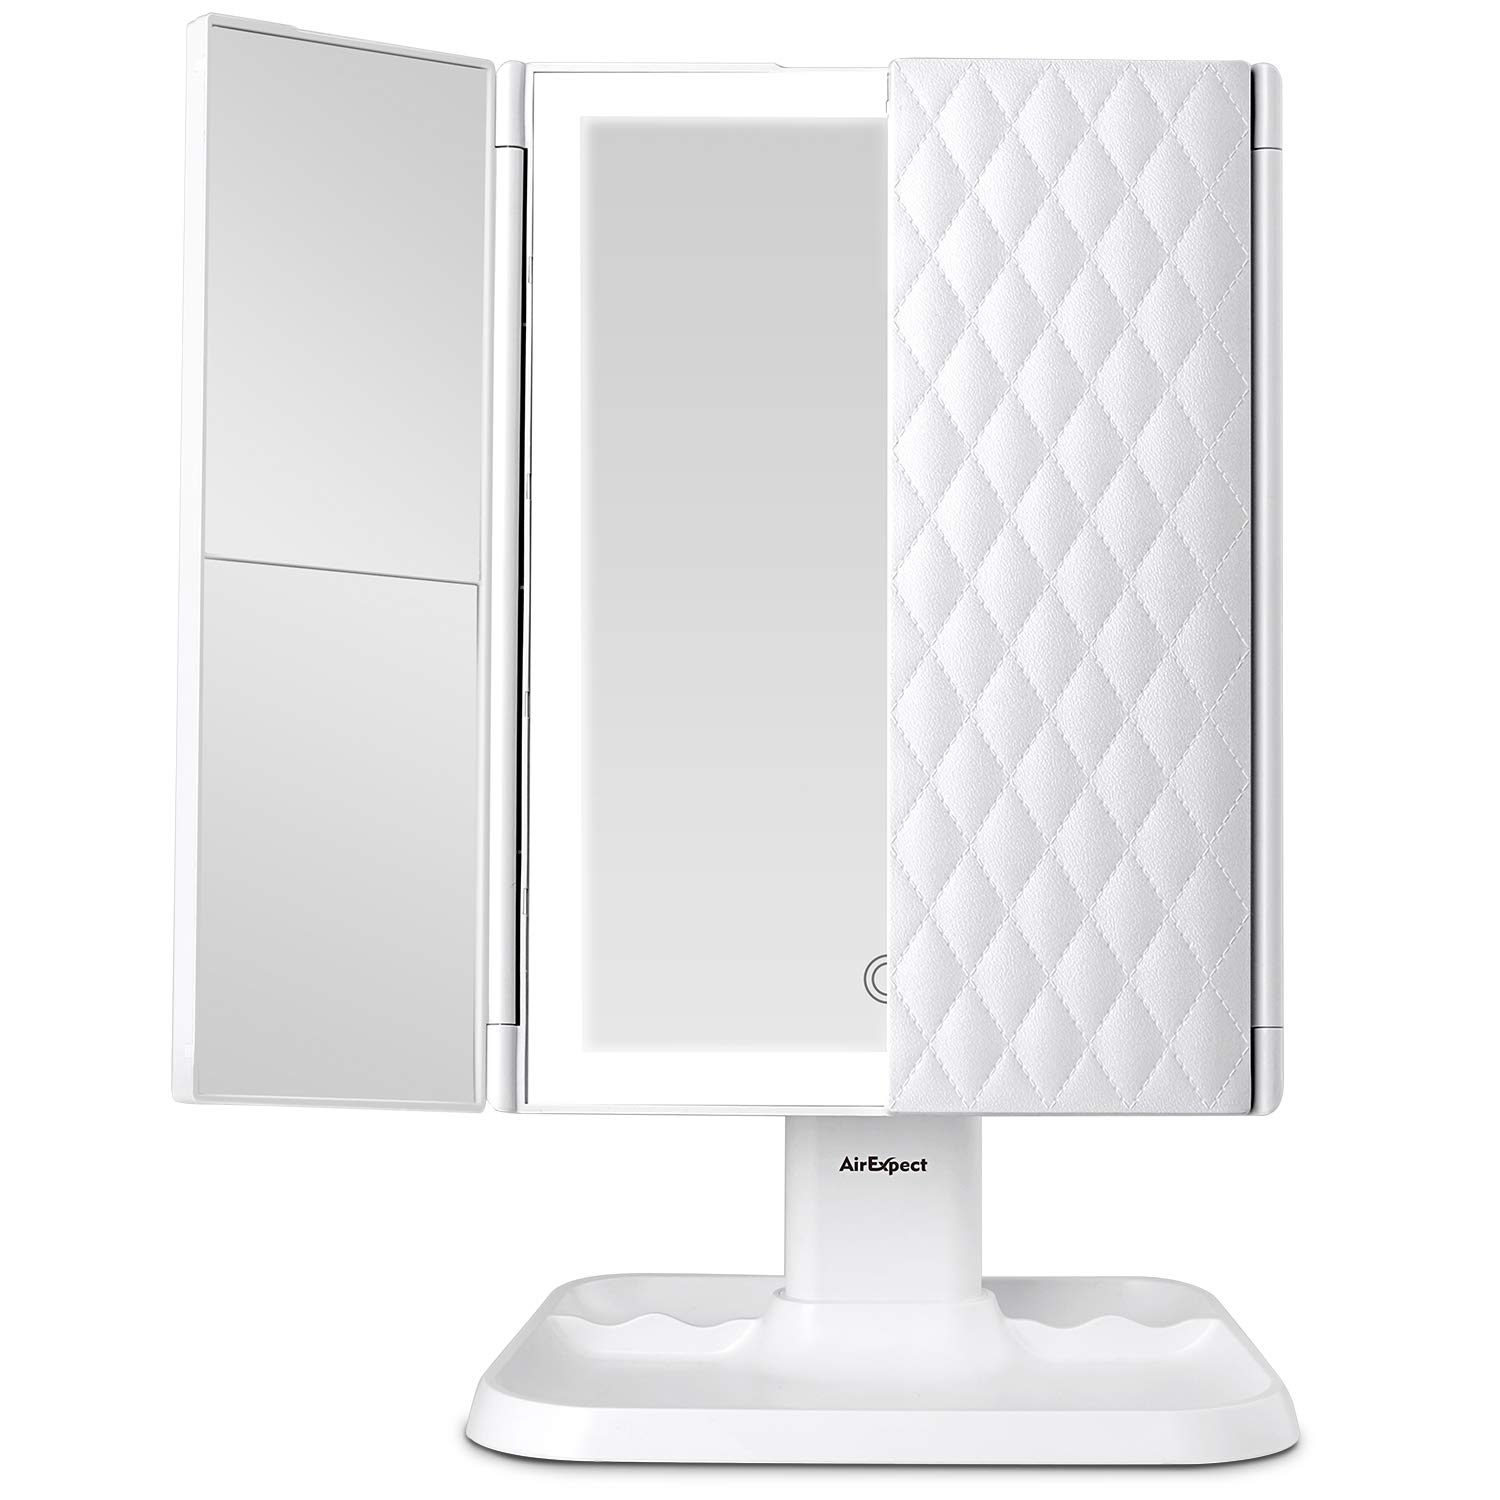 Makeup Mirror Vanity Mirror with Lights - 3 Color Lighting Modes 72 LED Trifold Mirror, Touch Control Design, $31 @amazon.com